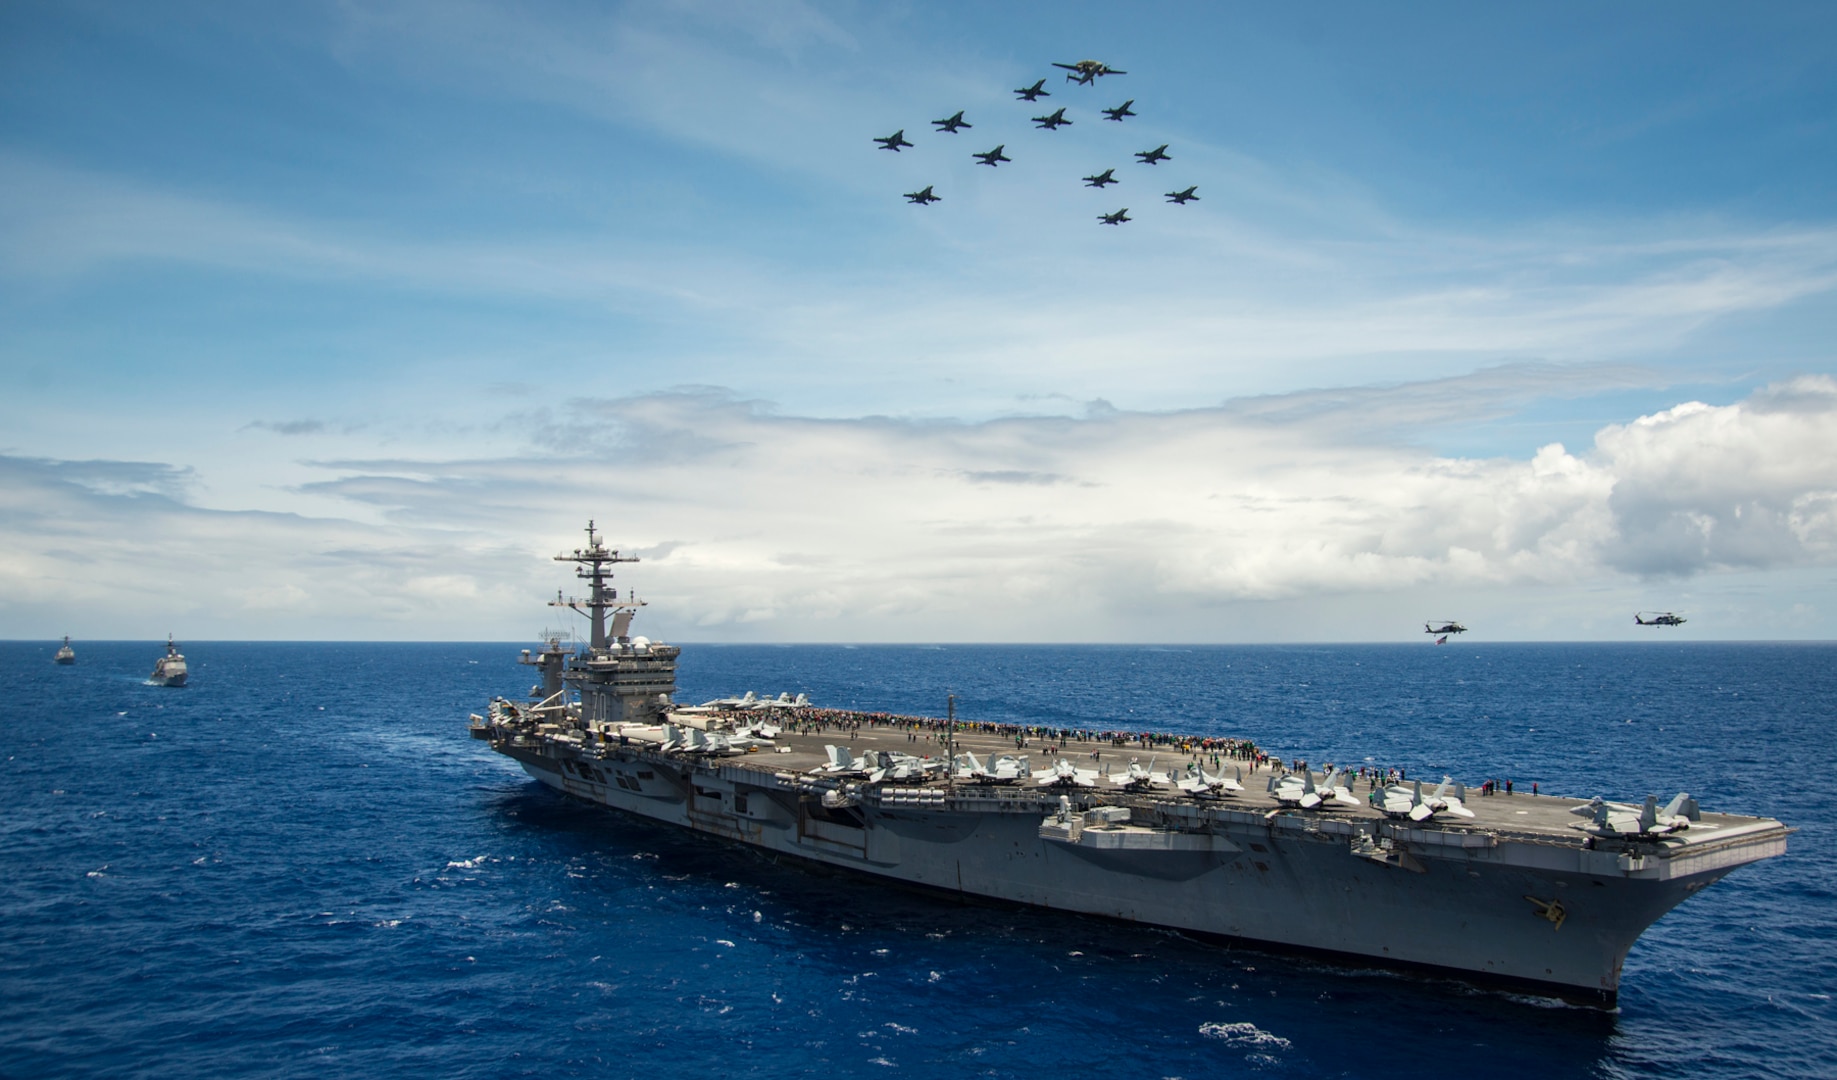 Aircraft assigned to Carrier Air Wing (CVW) 2 fly above the Nimitz-class aircraft carrier USS Carl Vinson (CVN 70) as part of an air power demonstration during a Tiger Cruise, June 18, 2017. Tiger Cruise allows friends and family members of Sailors to embark the ship to experience U.S. Navy life at sea. The U.S. Navy has patrolled the Indo-Asia-Pacific routinely for more than 70 years promoting regional peace and security. 